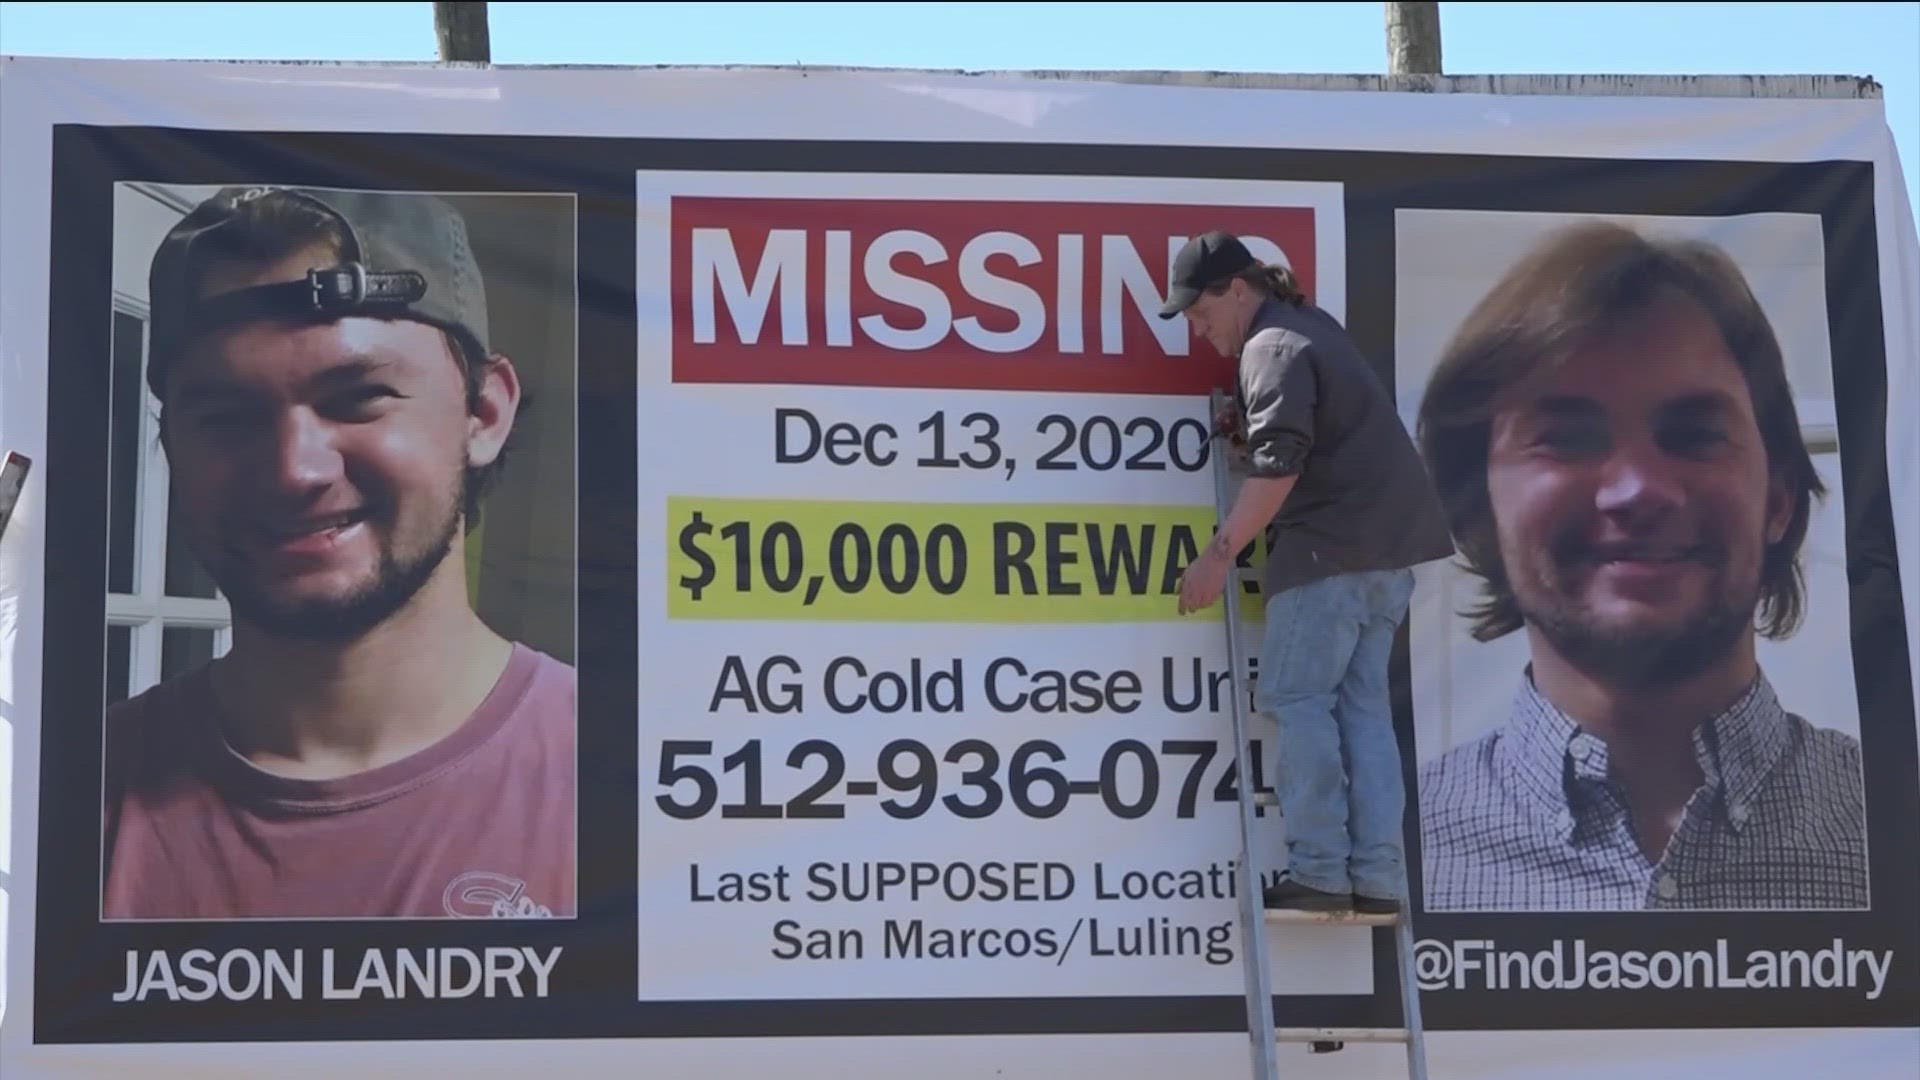 It's been three years since Jason Landry was last seen. The college student's car was found crashed in Luling in 2020.